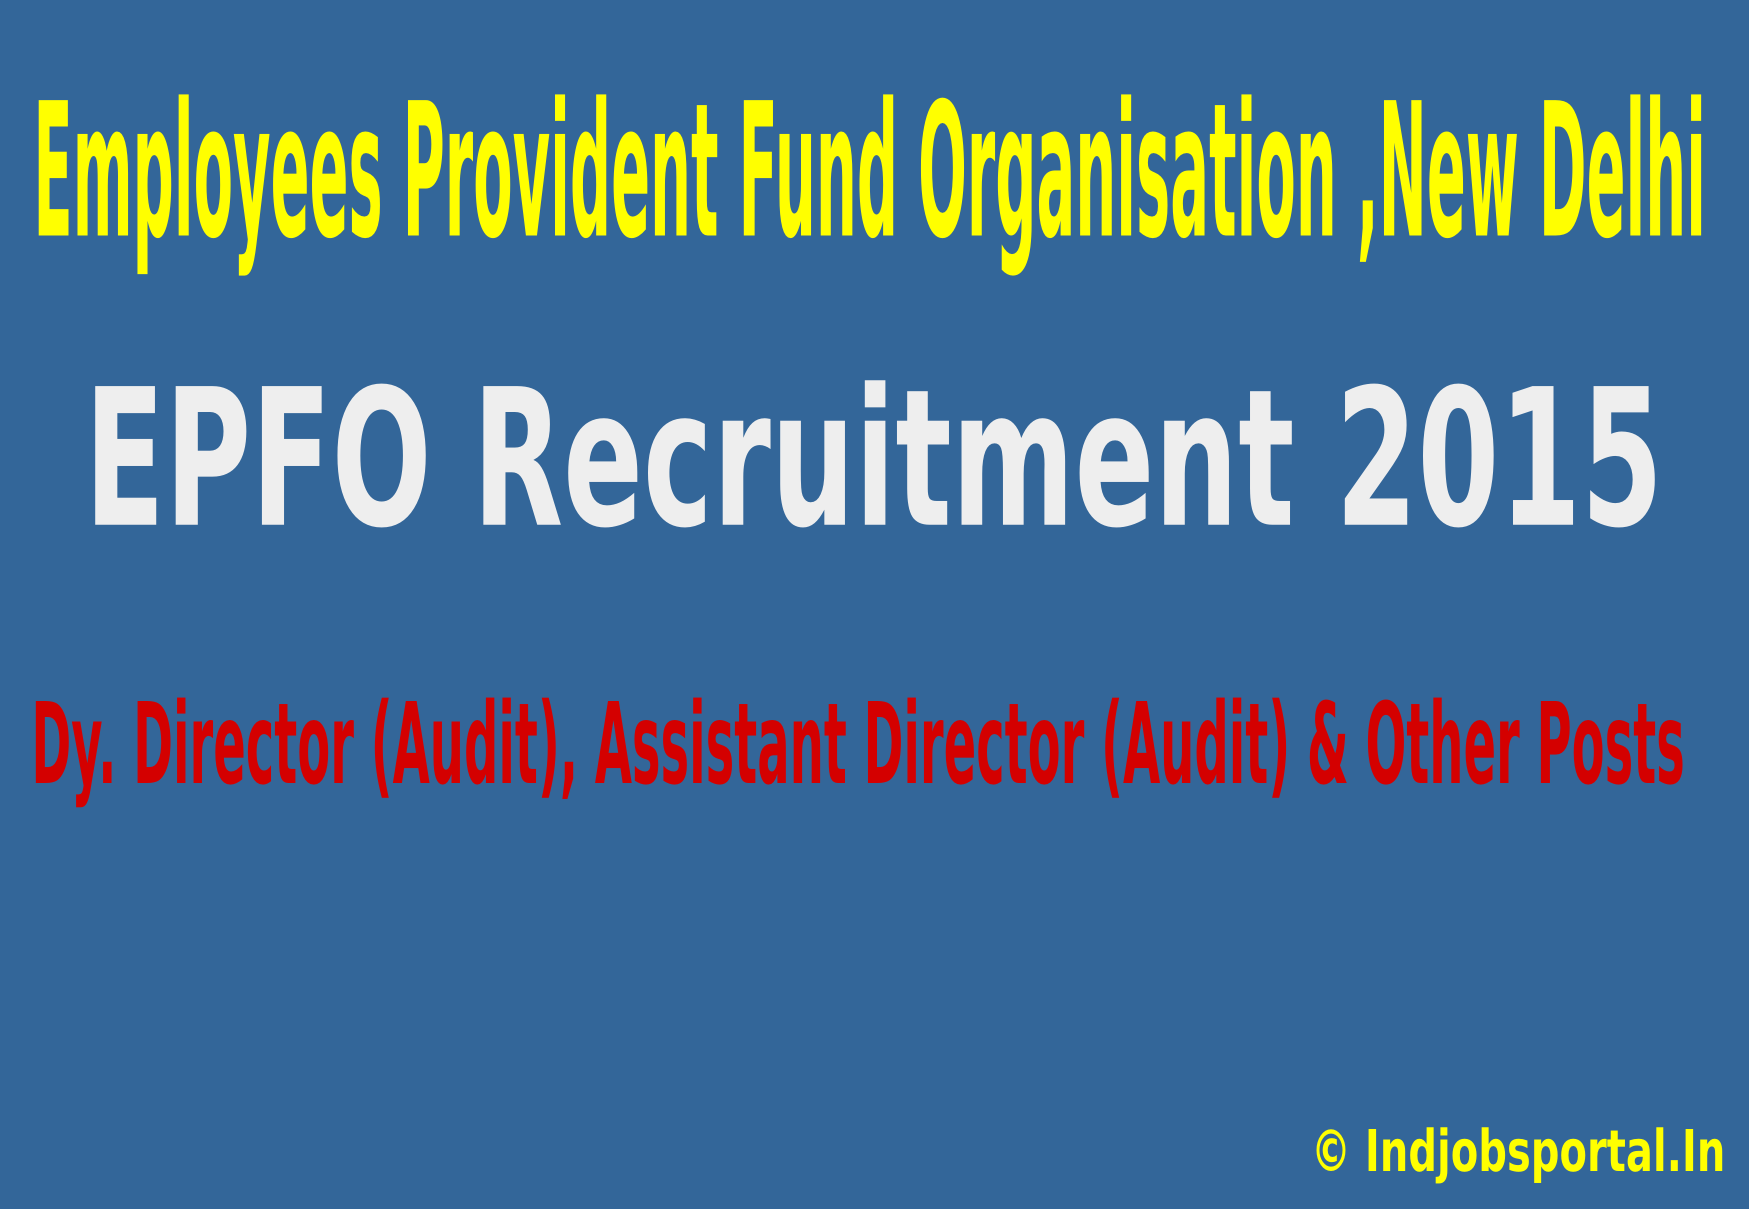 EPFO Recruitment 2015 For 81 Dy. Director (Audit), Assistant Director (Audit) & Other Posts